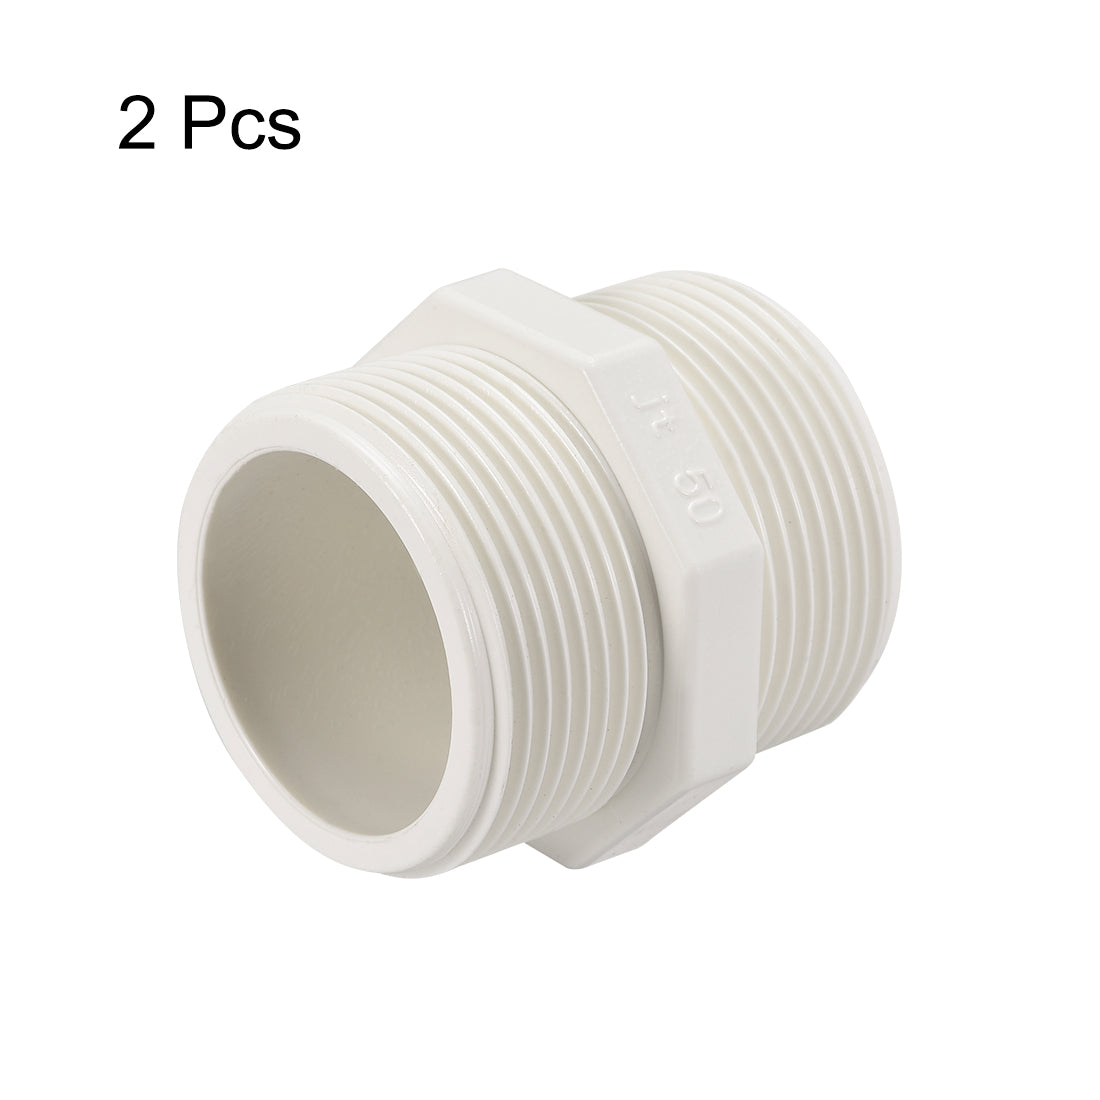 uxcell Uxcell PVC Pipe Fitting Hex Nipple G1-1/2 x G1-1/2 Male Thread Adapter Connector 2pcs